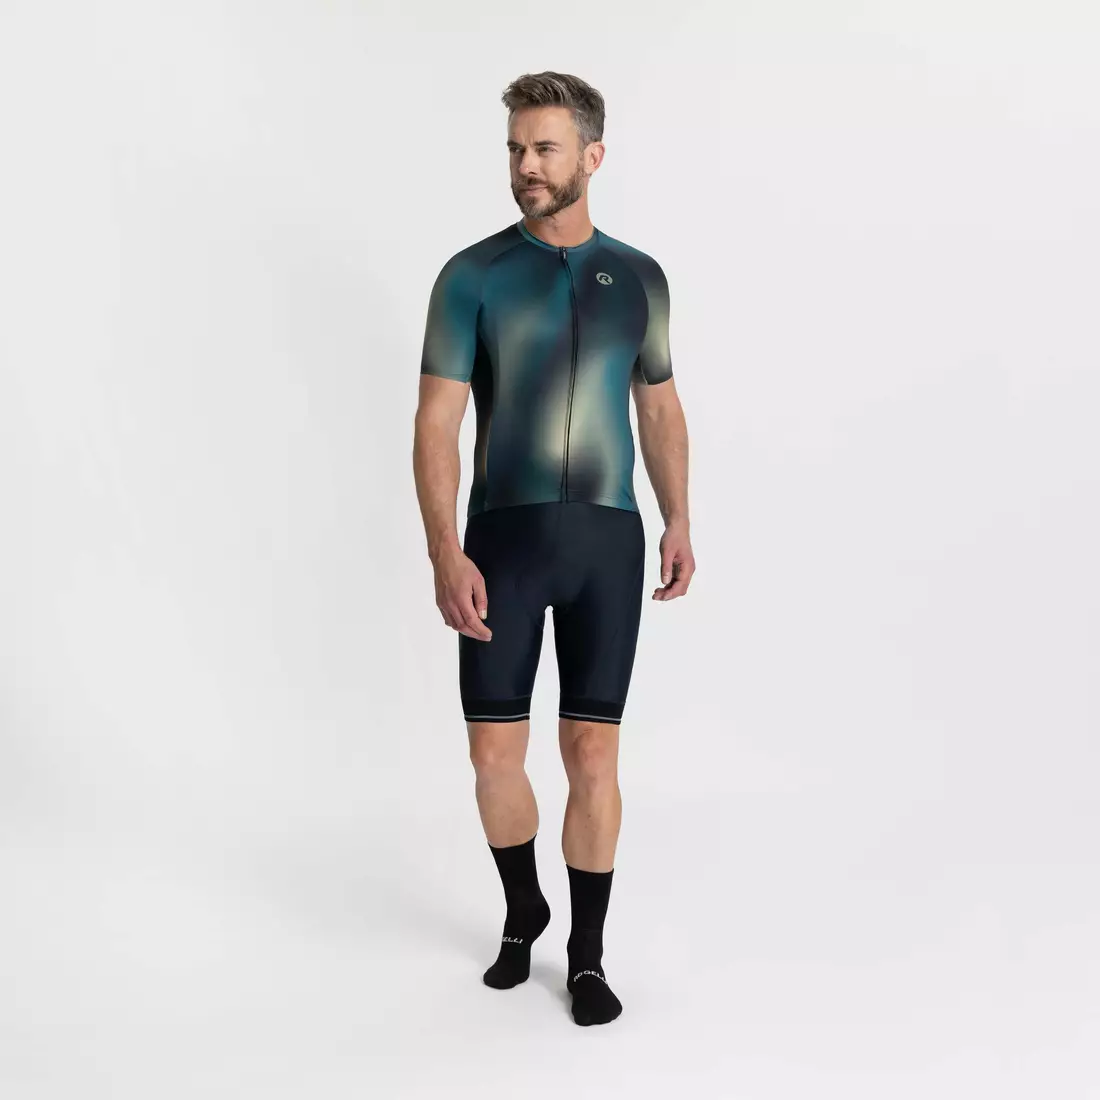 Rogelli HALO cycling jersey green